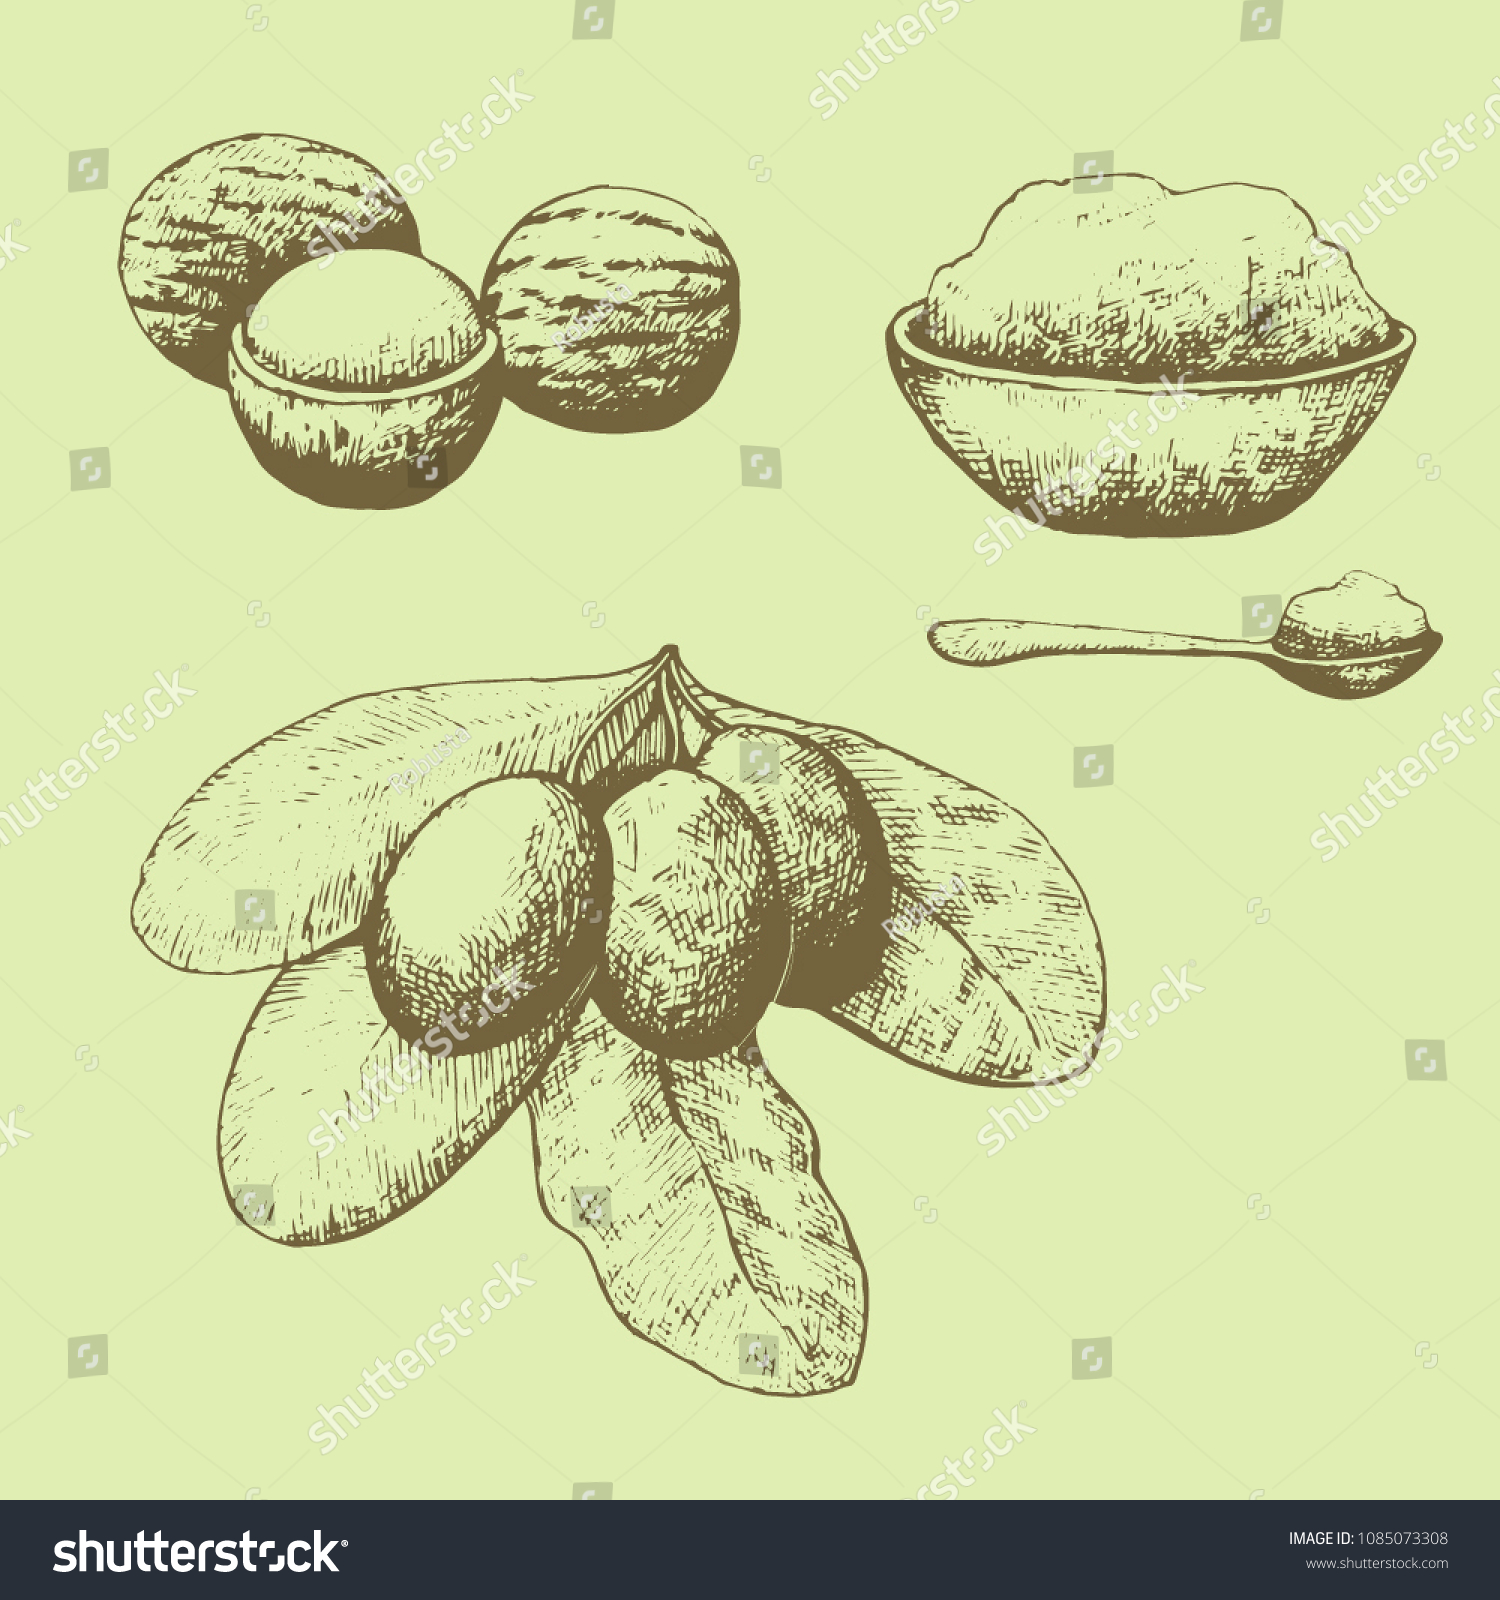 SVG of Shea nuts and butter set. Hand drawn illustration svg